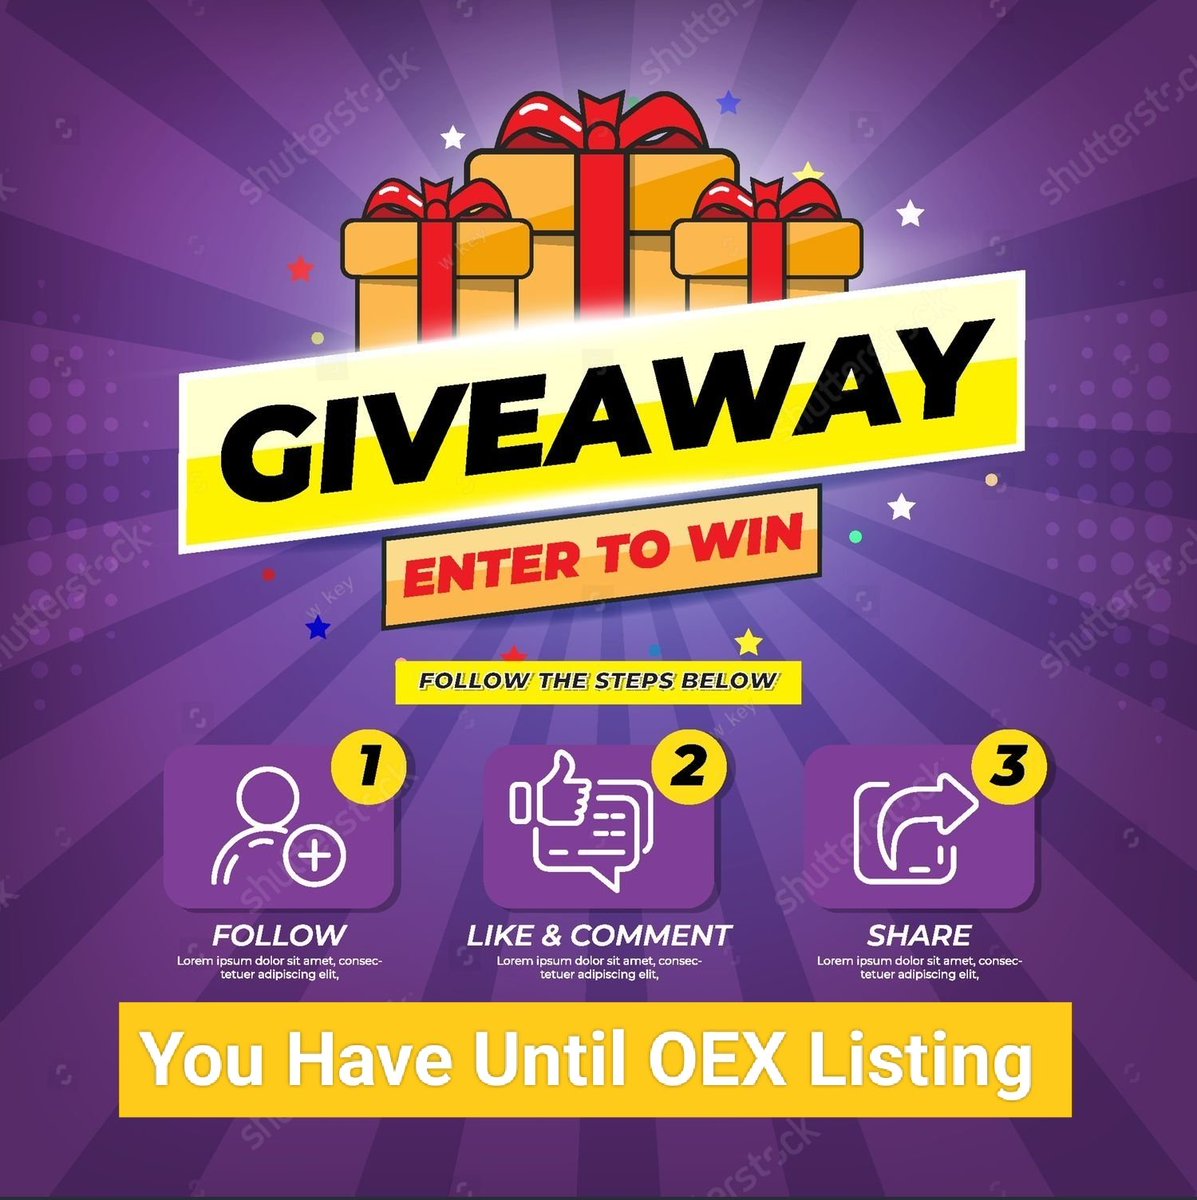 #Giveawaytime 
🔶 Special 🎁Giveaway for #OEXCommunity 

🔶To Enter 👇
1. Follow @OEXcommunity 

2. Like ❤️ 

3. Tag @ 🔖3 Friends

4. Retweet 🔁